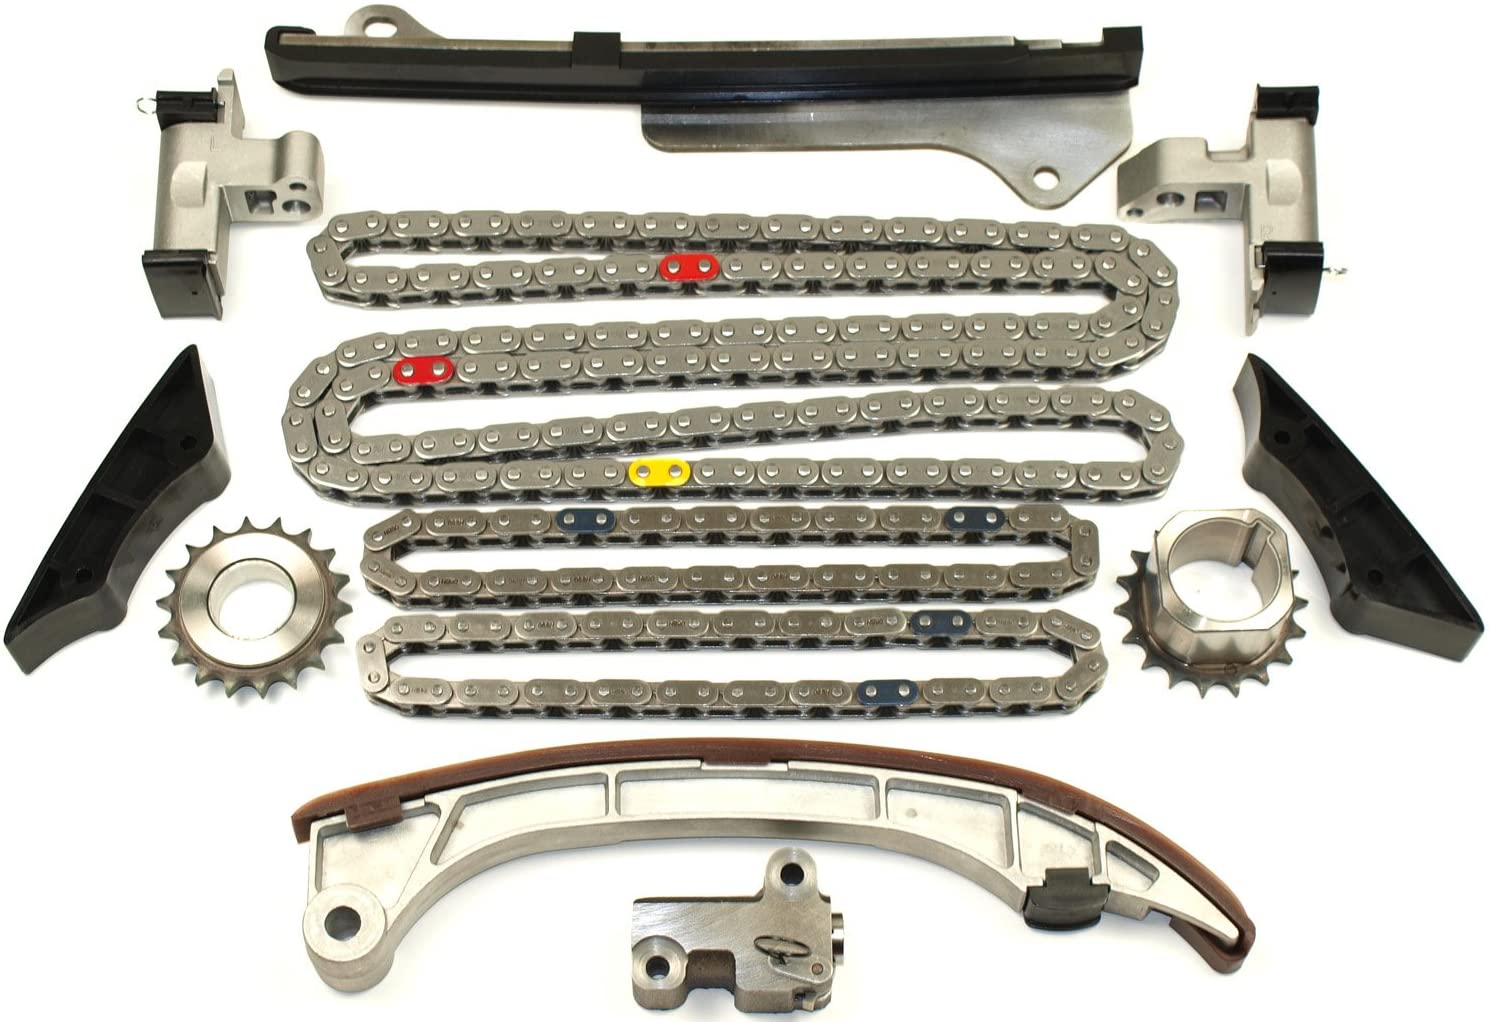 Cloyes 9-4215S Timing Chain Kit